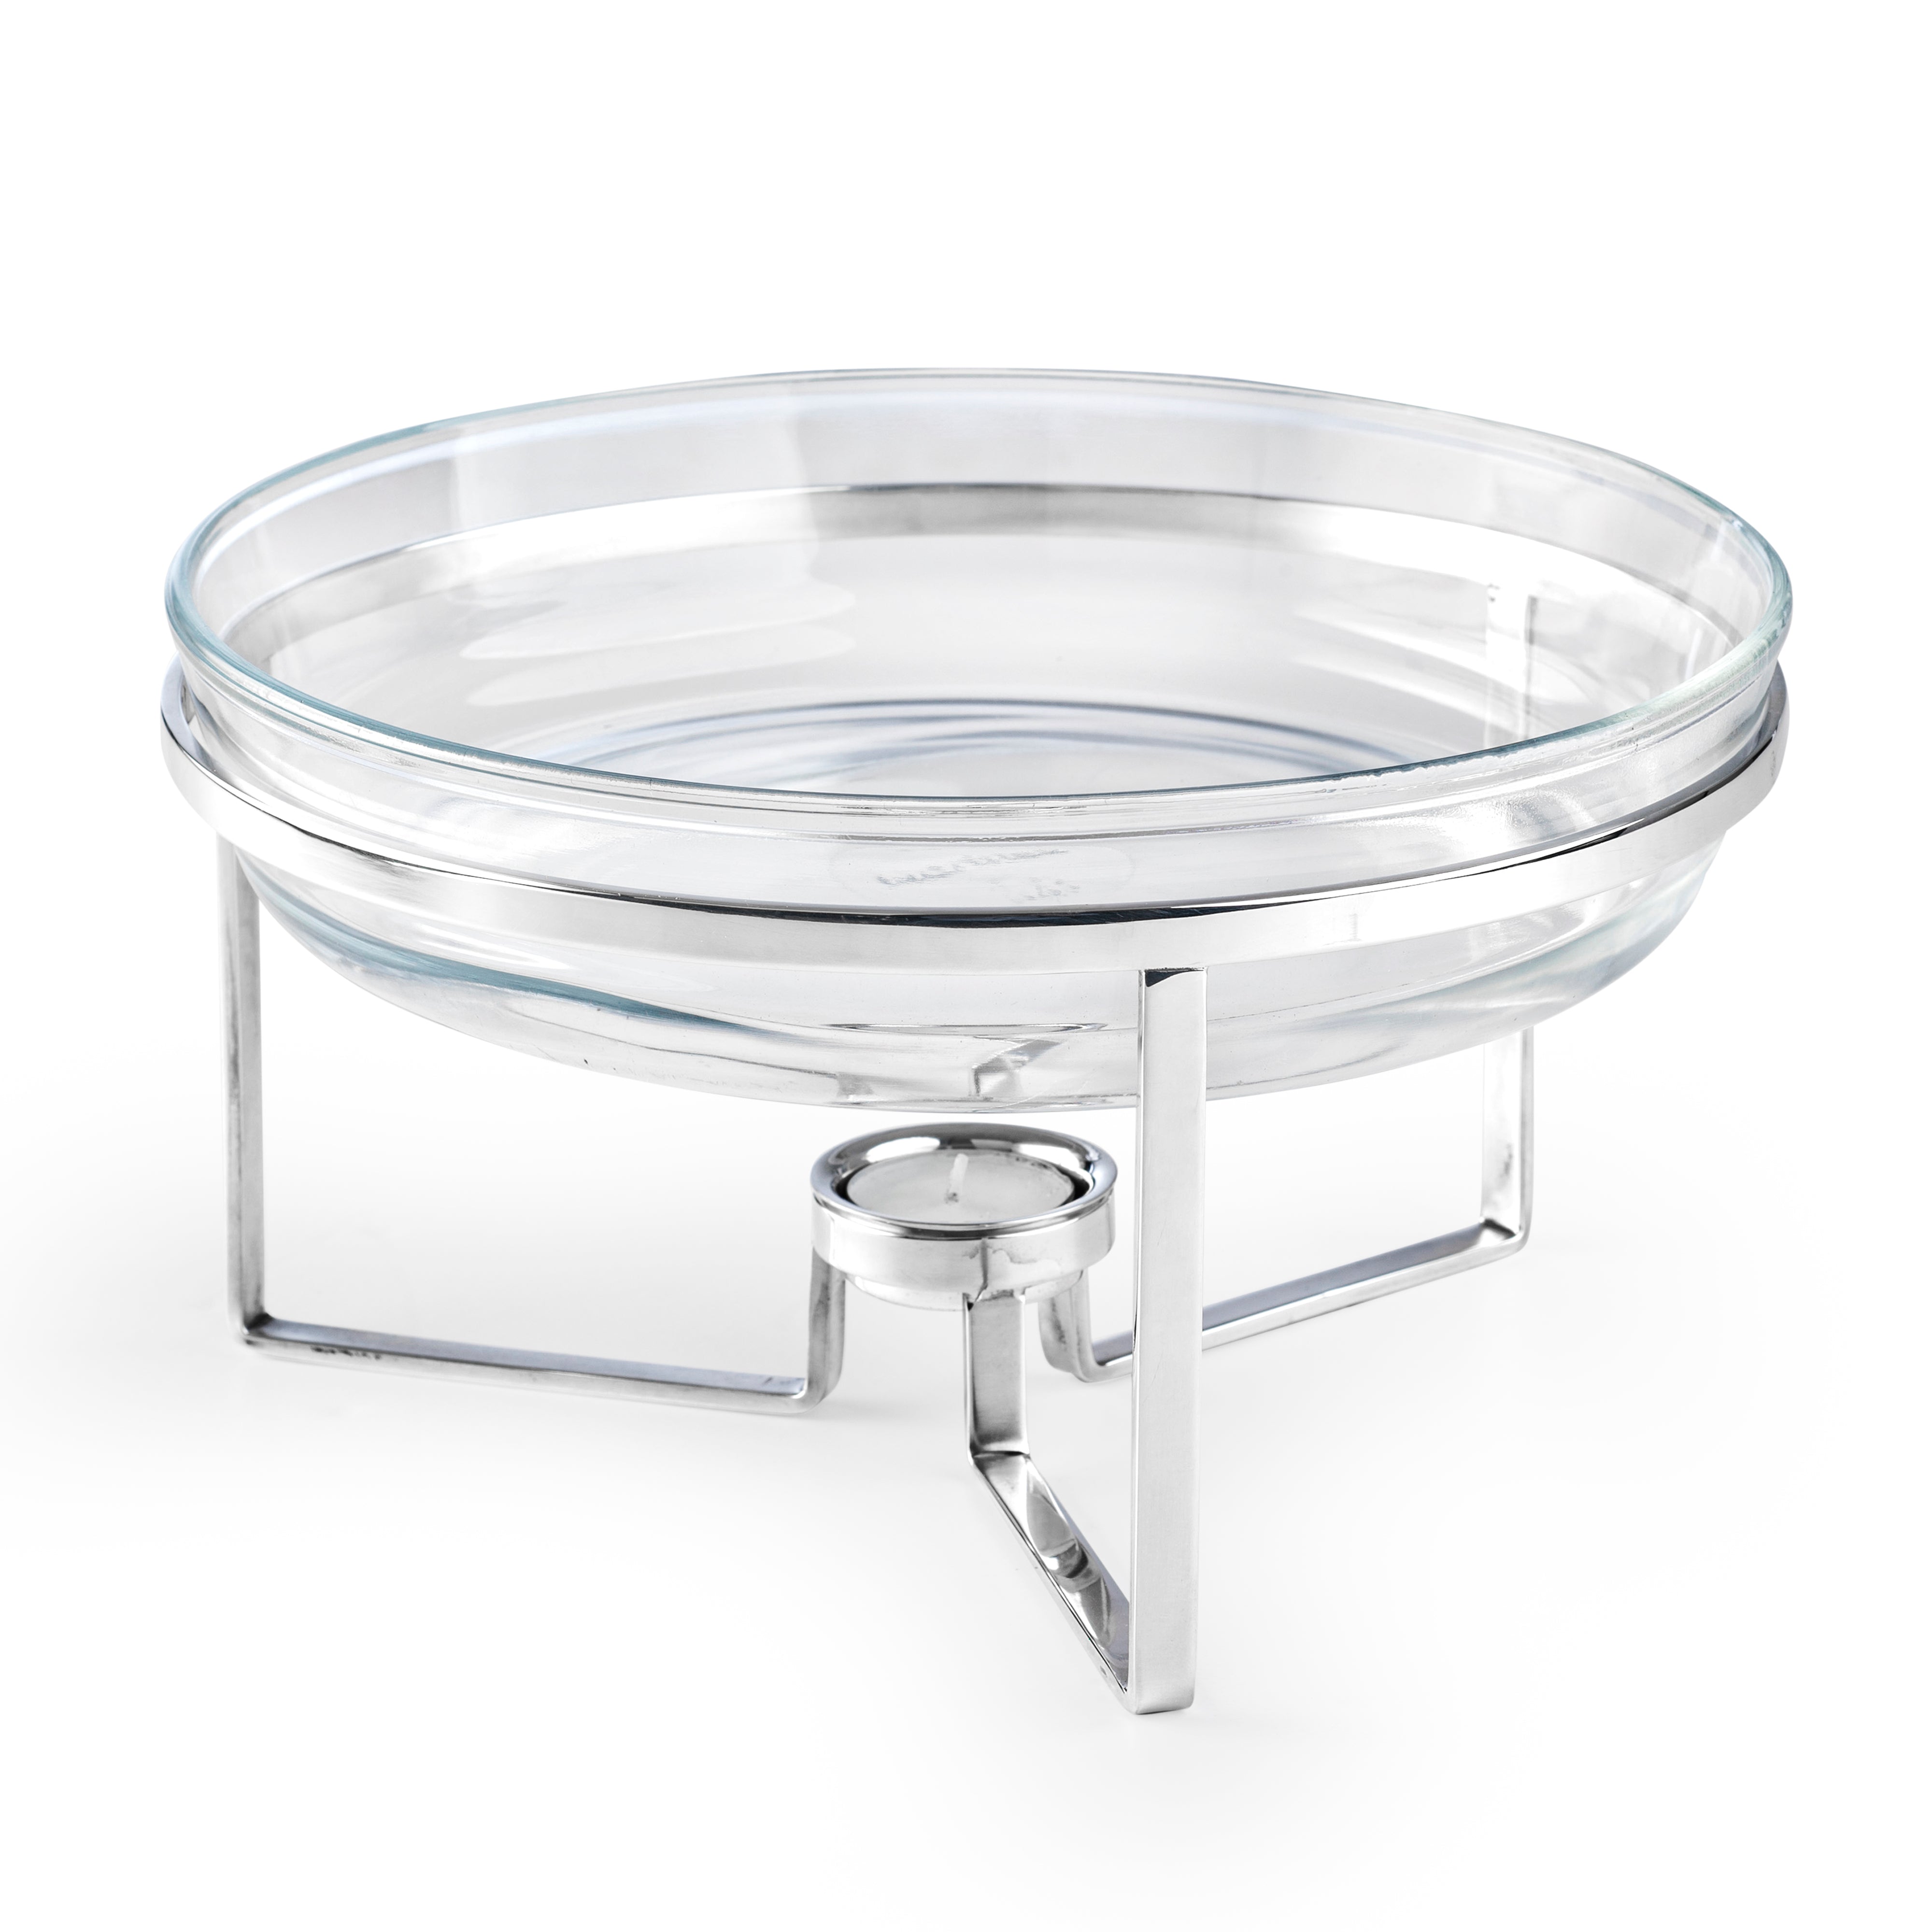 Chafing Dish Fil D'ariane 1 Candle